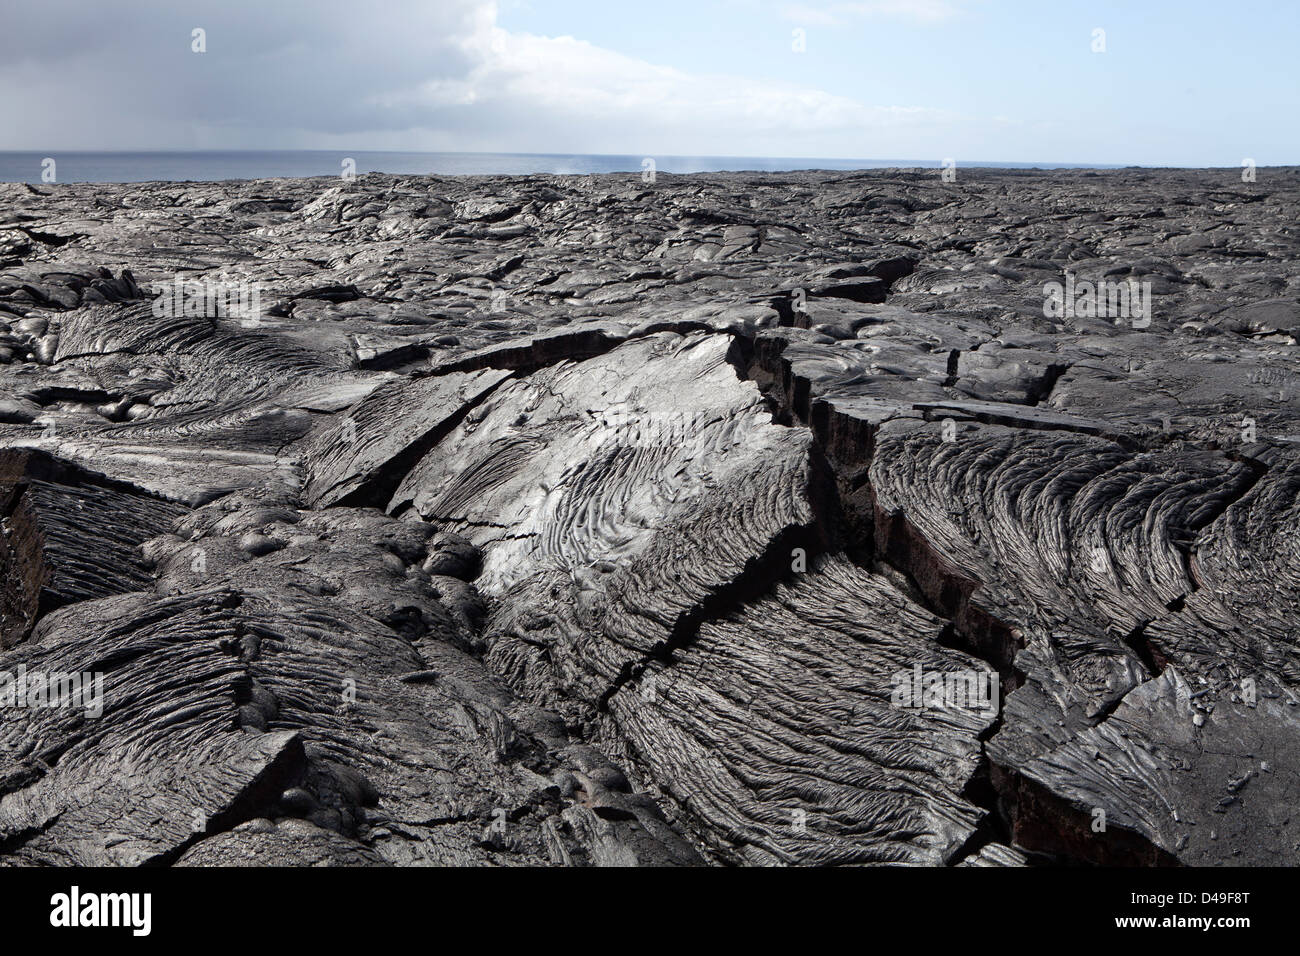 A lava formation at the Hawaii Volcanoes National Park, Big Island ...